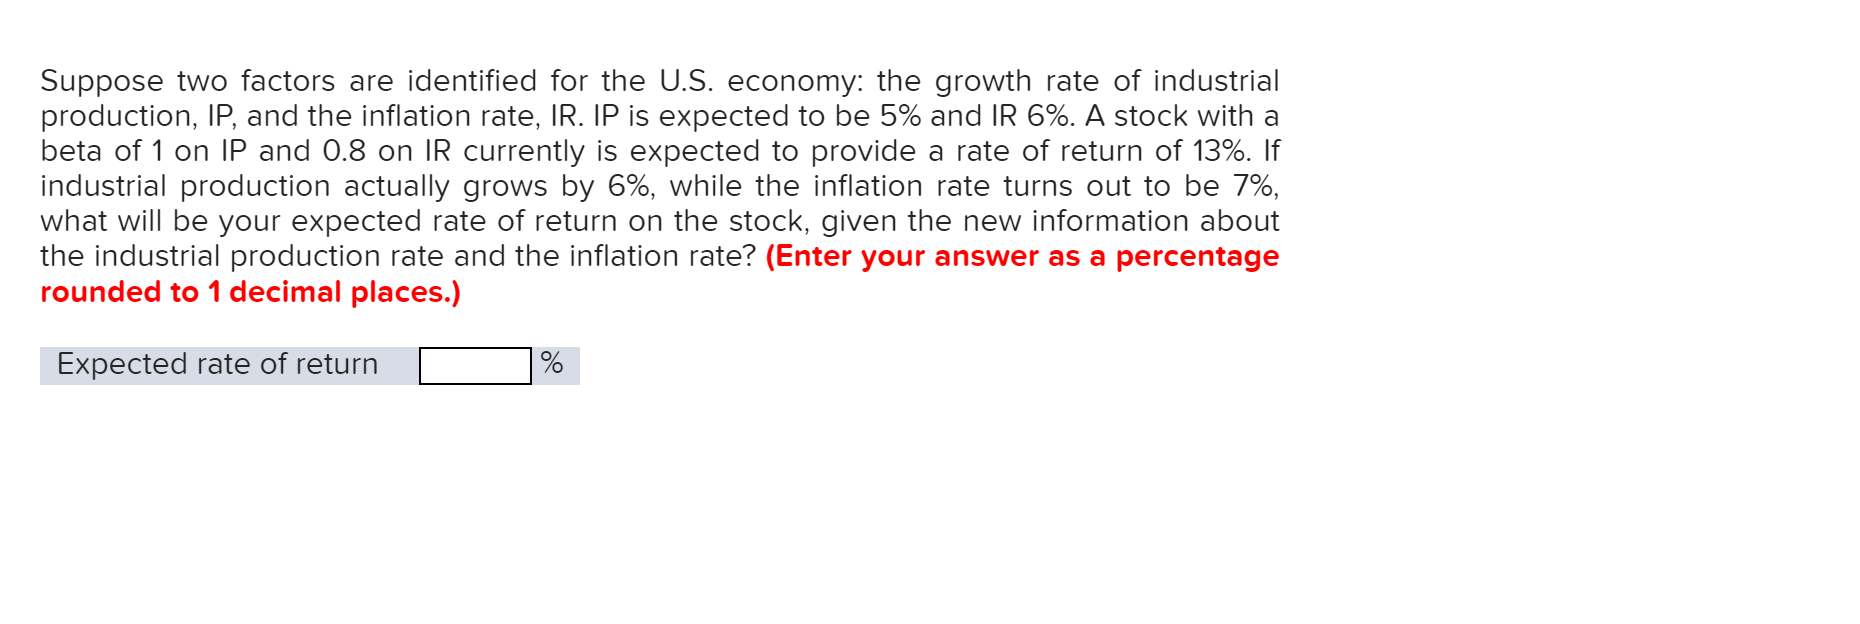 Suppose two factors are identified for the U.S. economy: the growth rate of industrial
production, IP, and the inflation rate, IR. IP is expected to be 5% and IR 6%. A stock with a
beta of 1 on IP and 0.8 on IR currently is expected to provide a rate of return of 13%. If
industrial production actually grows by 6%, while the inflation rate turns out to be 7%,
what will be your expected rate of return on the stock, given the new information about
the industrial production rate and the inflation rate? (Enter your answer as a percentage
rounded to 1 decimal places.)
Expected rate of return
